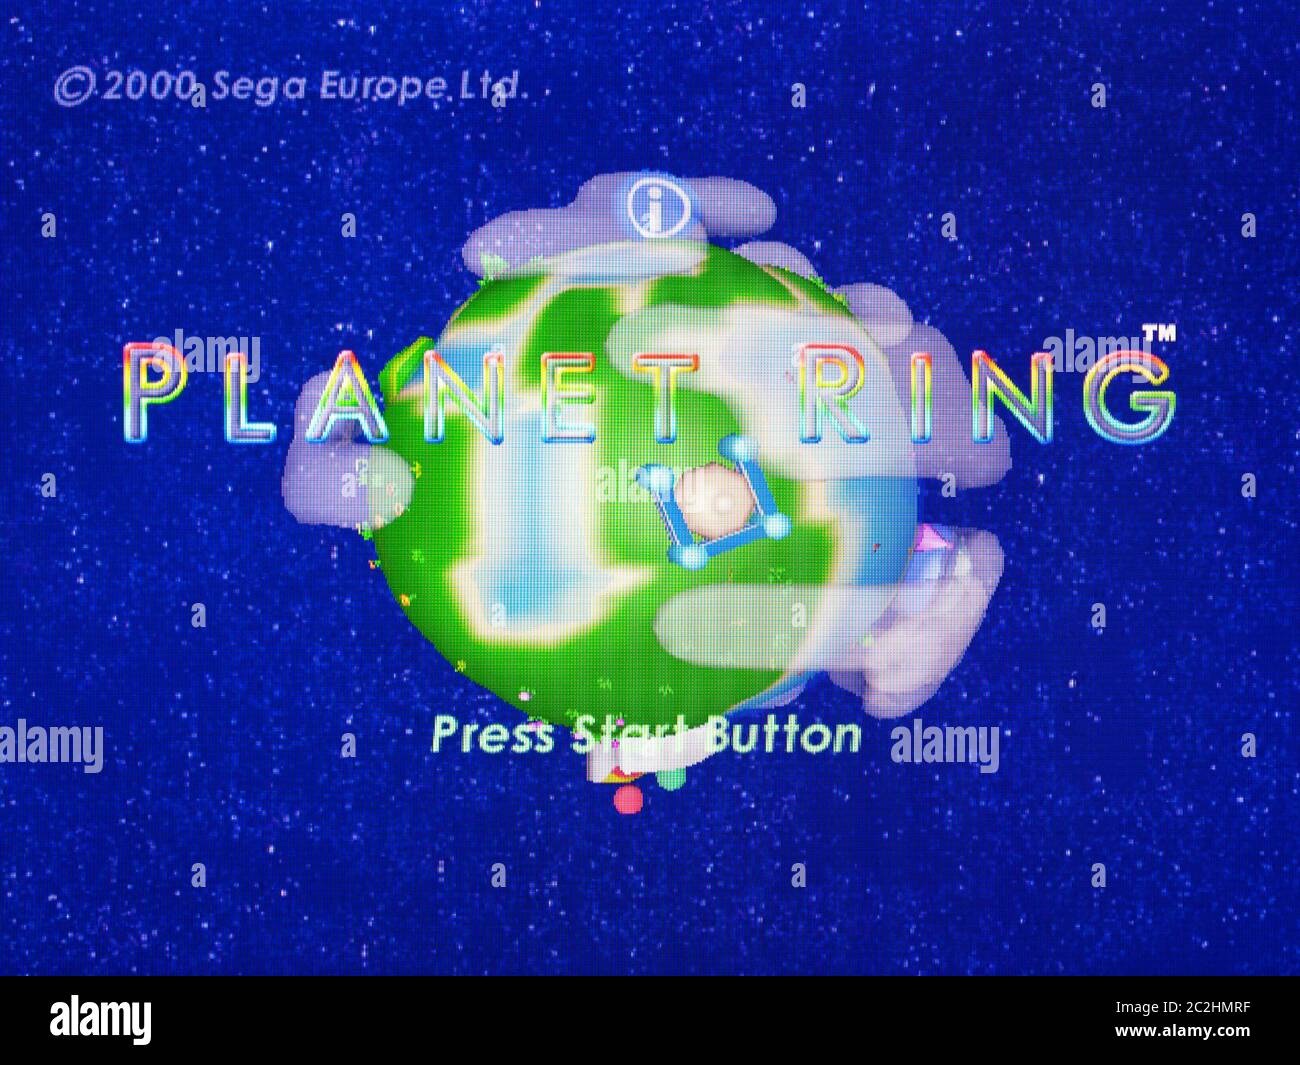 Planet Ring - Sega Dreamcast Videogame - Editorial use only Stock Photo